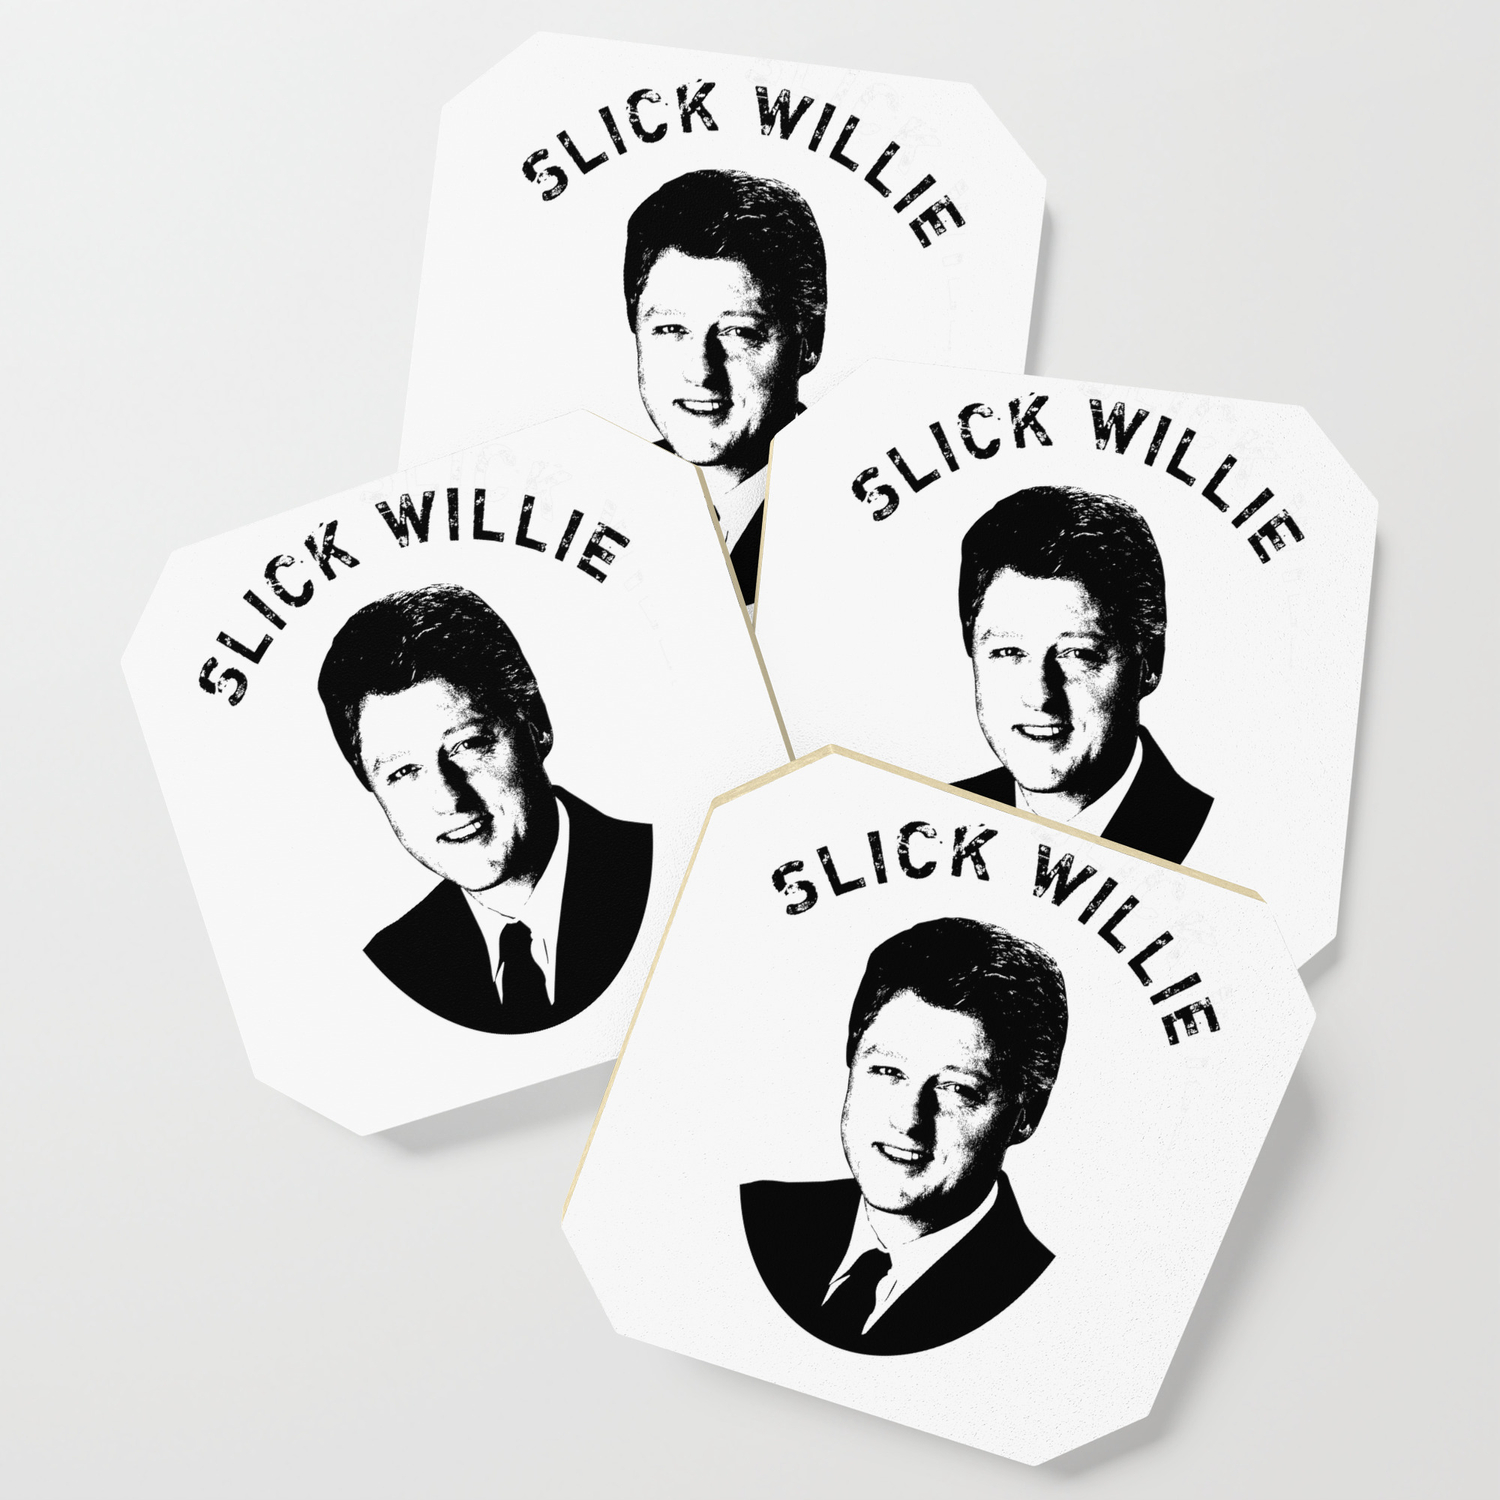 Bill Clinton "Slick Willy" Posters 